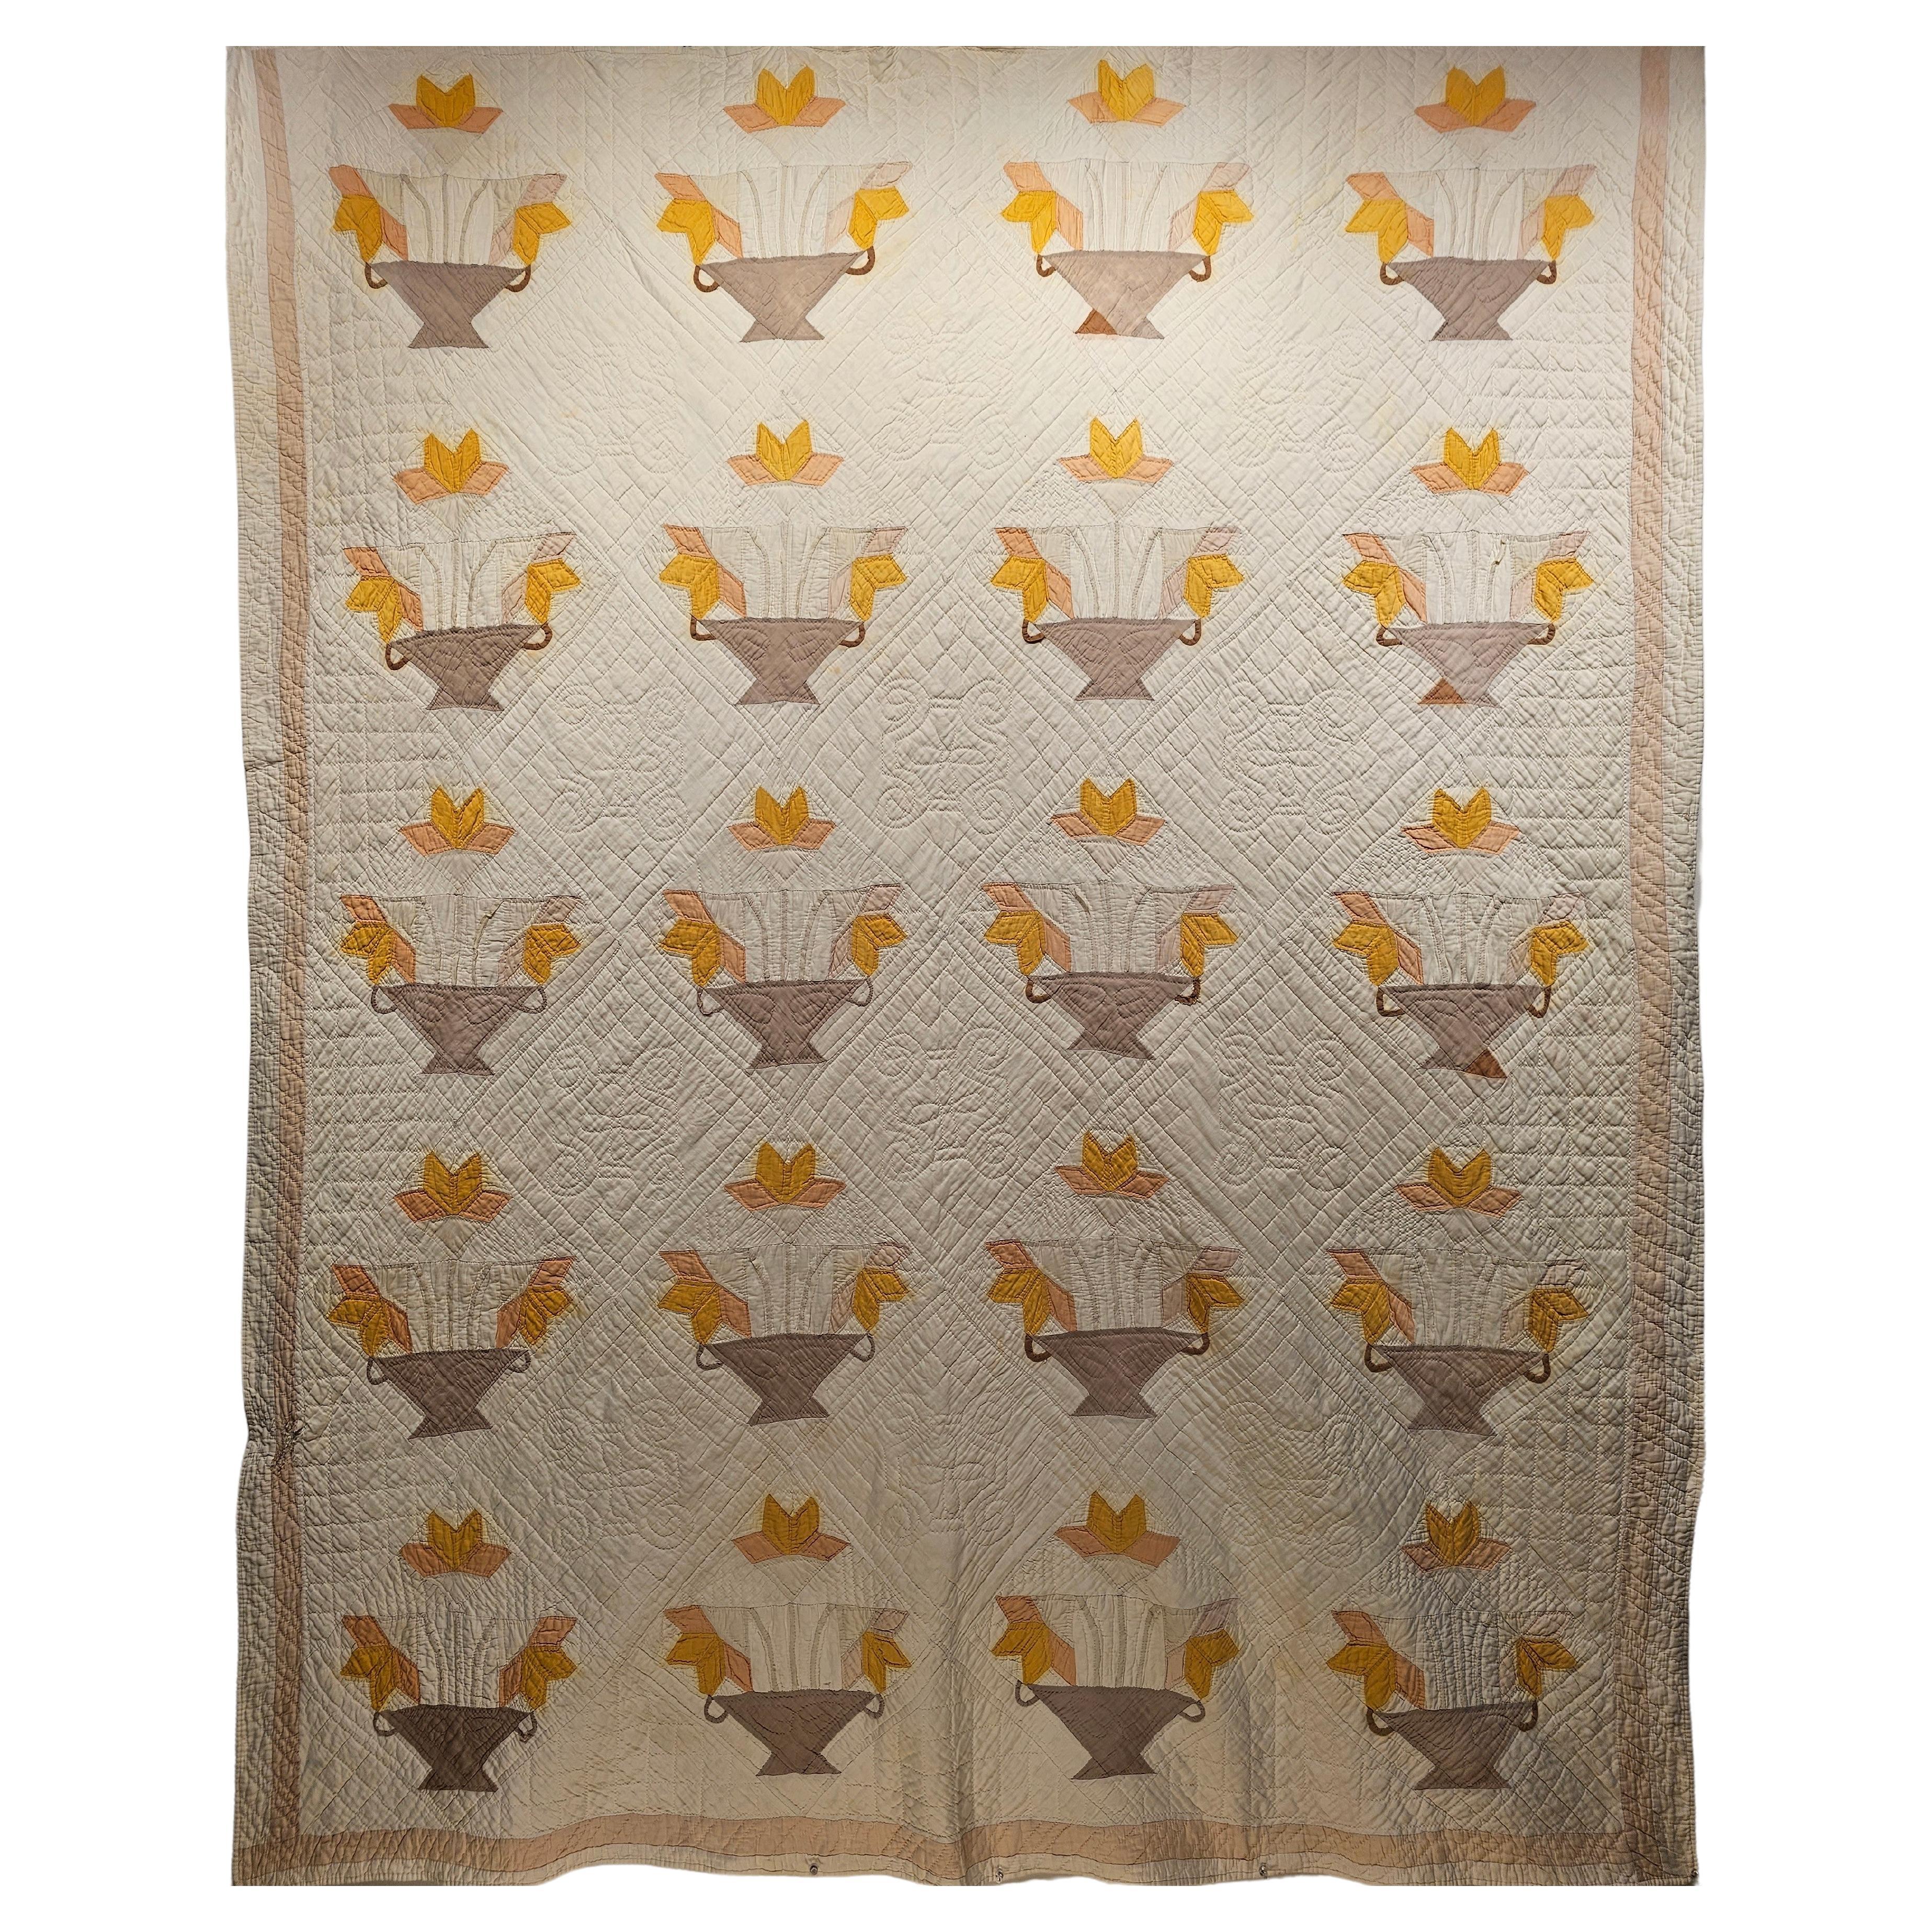 Vintage Hand Stitched Applique Quilt in Basket Pattern in Ivory, Brown, Yellow For Sale